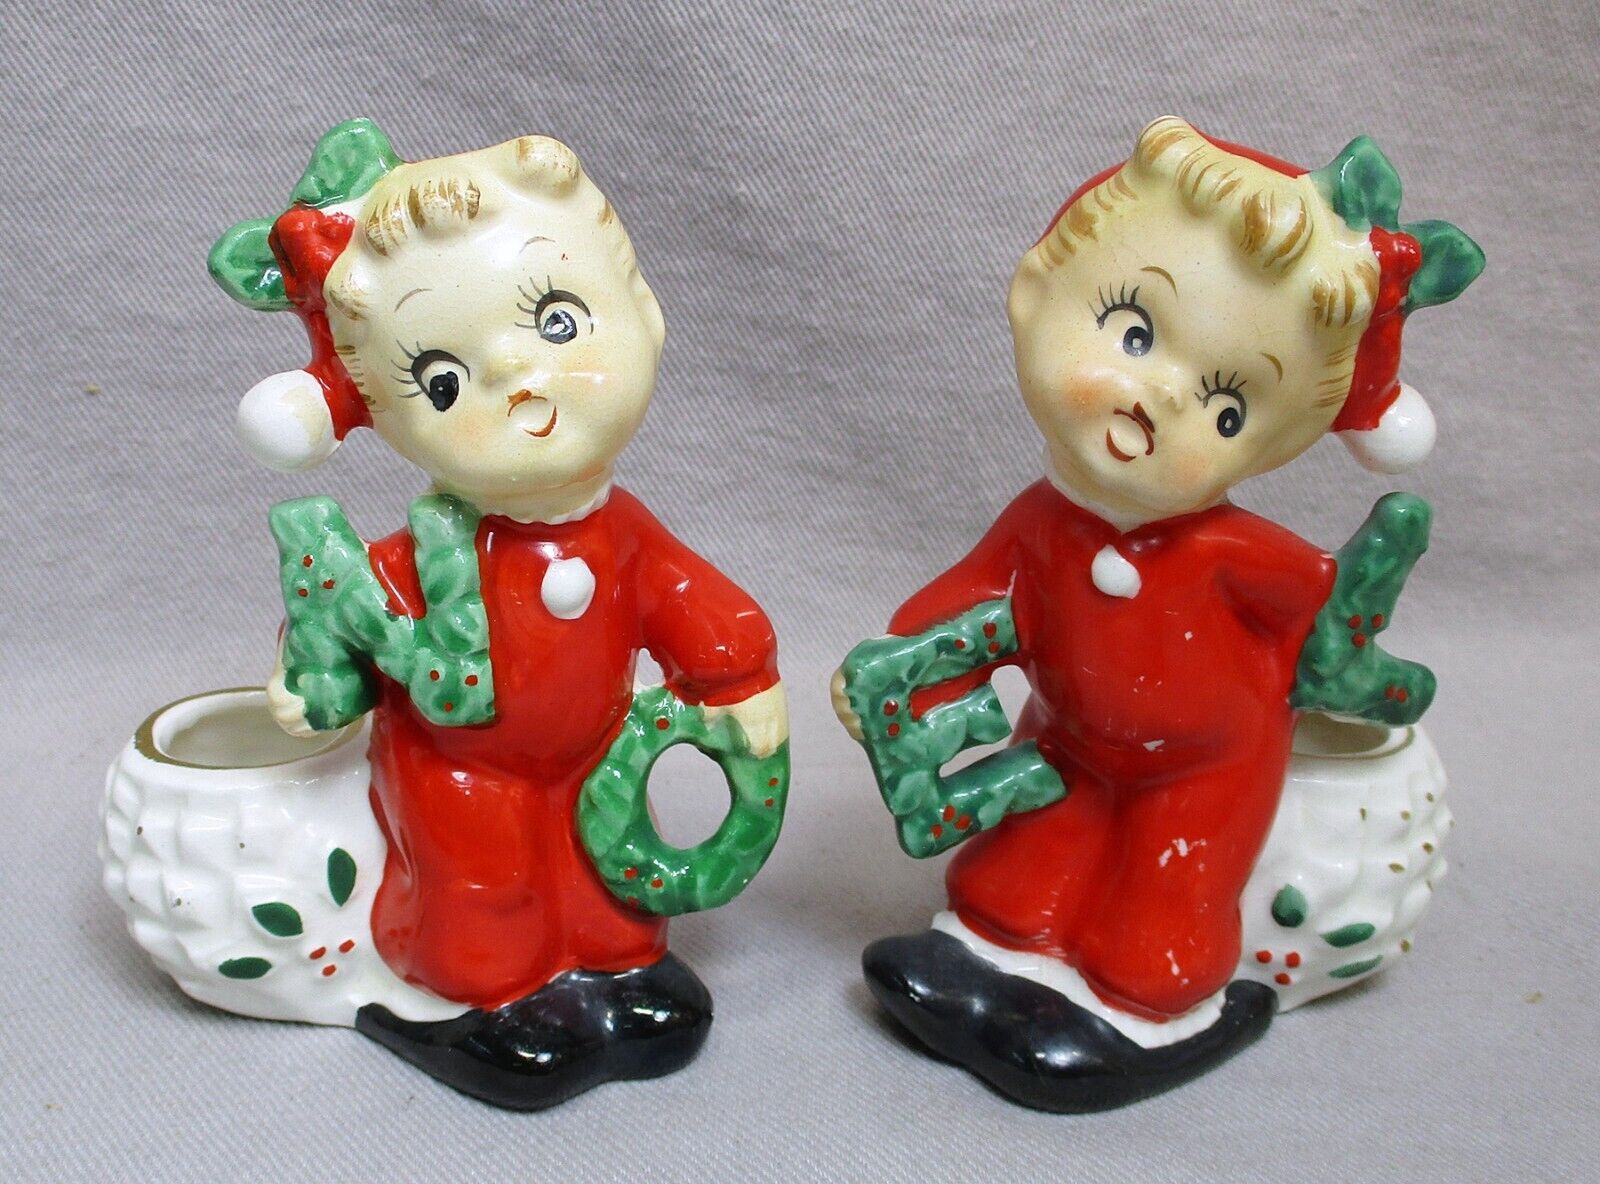 Rare 1950s Commodore Japan Christmas *NOEL* Girl Pixie Figurine Candle Holders